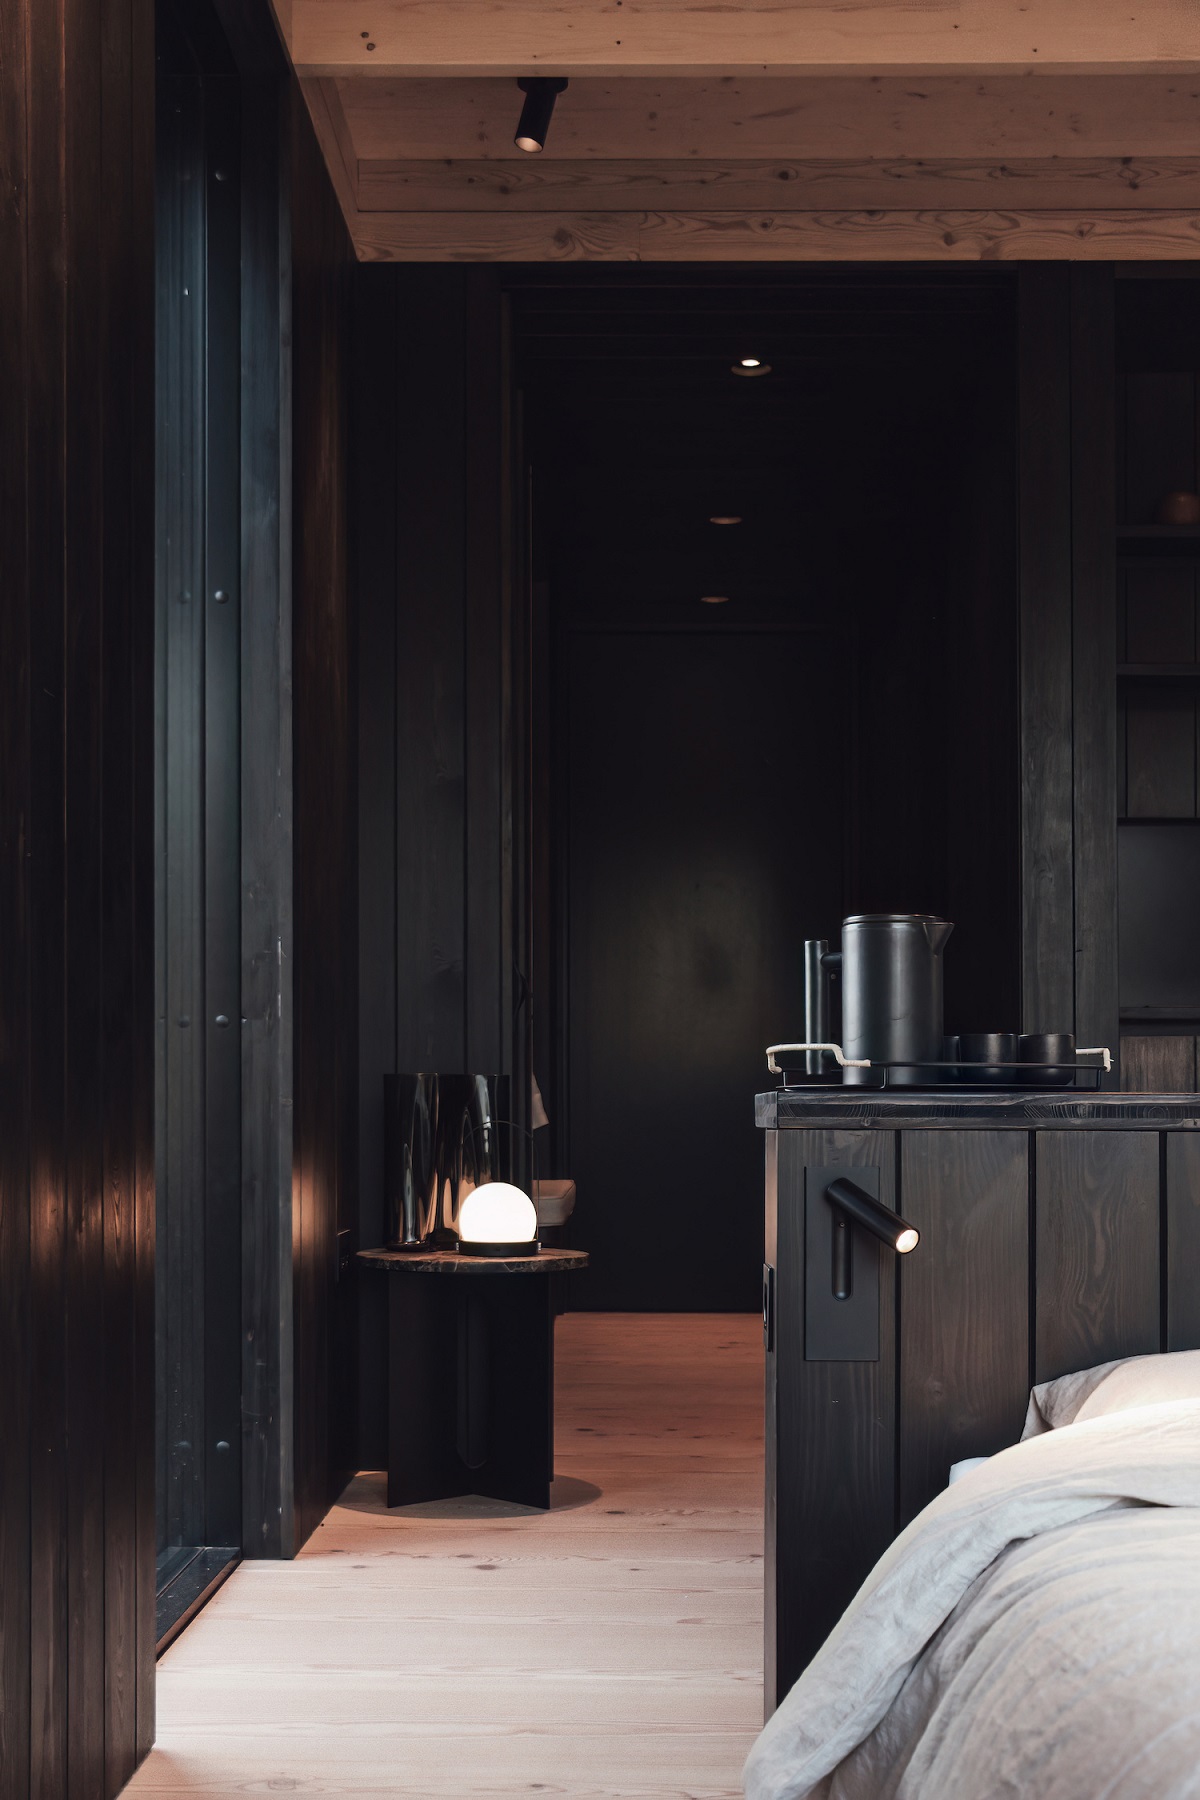 wooden floors, black wooden wall cladding and a light wood ceiling in the Nokken cabin